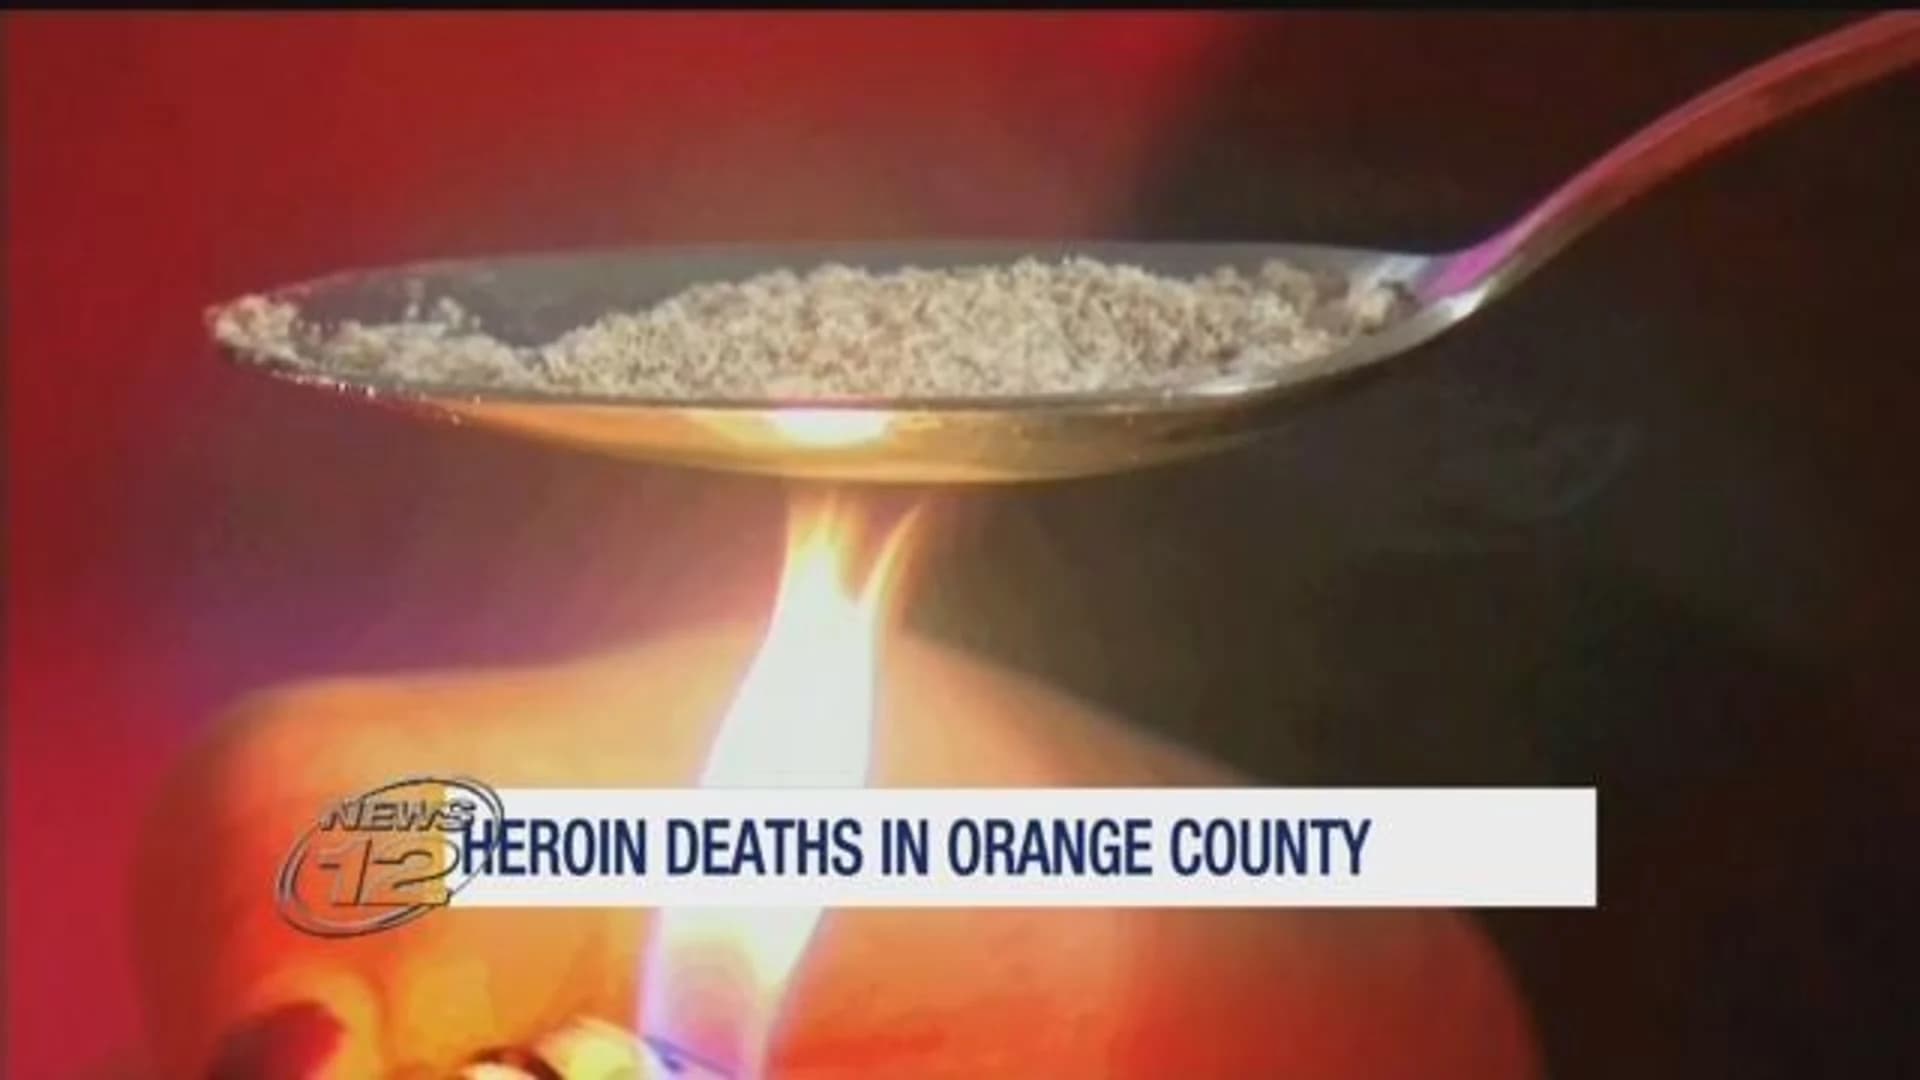 Orange Co. seeks to combat heroin epidemic with education, treatment